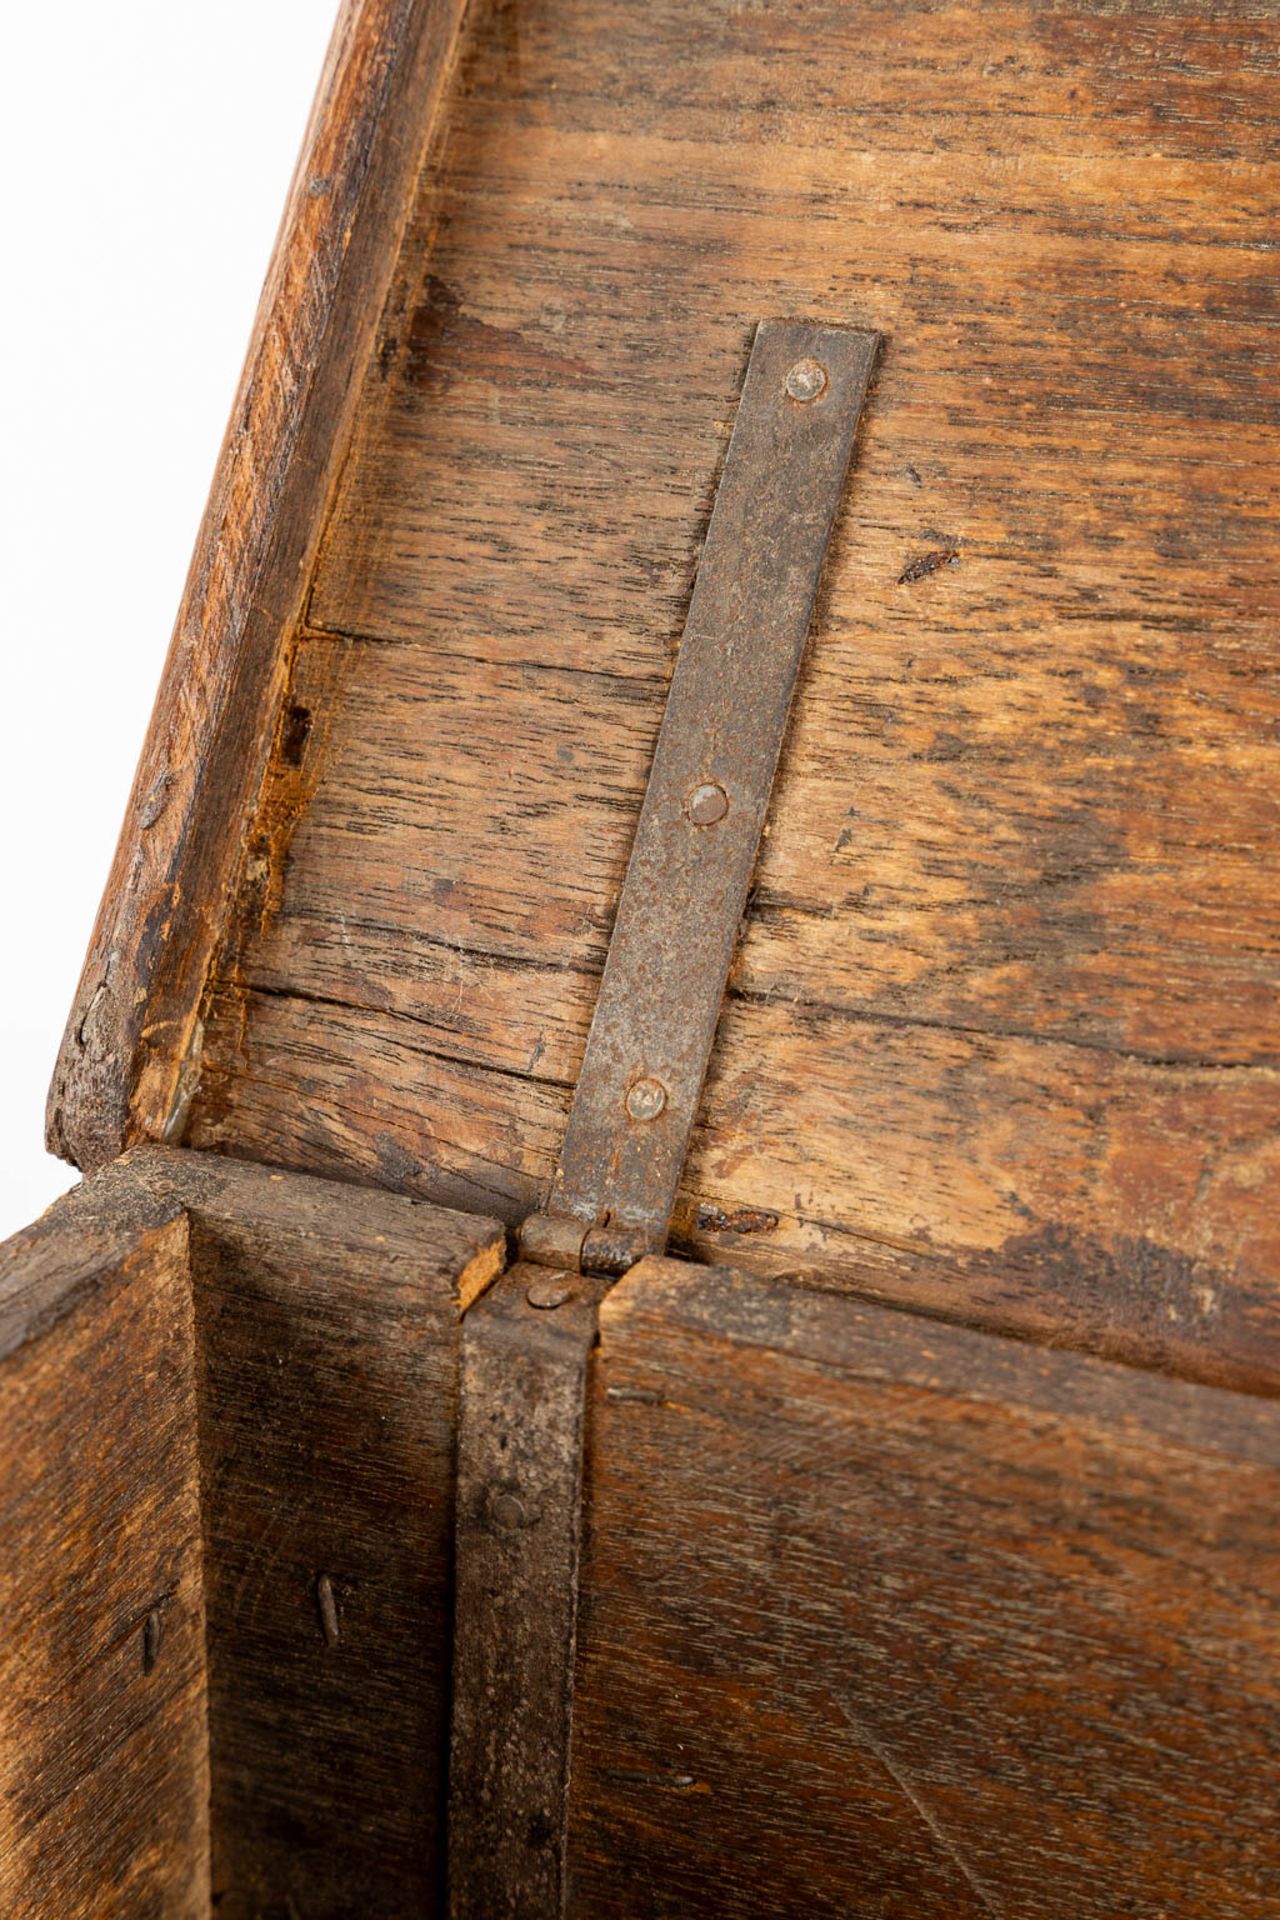 An antique money box or storage chest, oak and wrought iron, 19th C. (L:23 x W:31 x H:13 cm) - Image 8 of 13